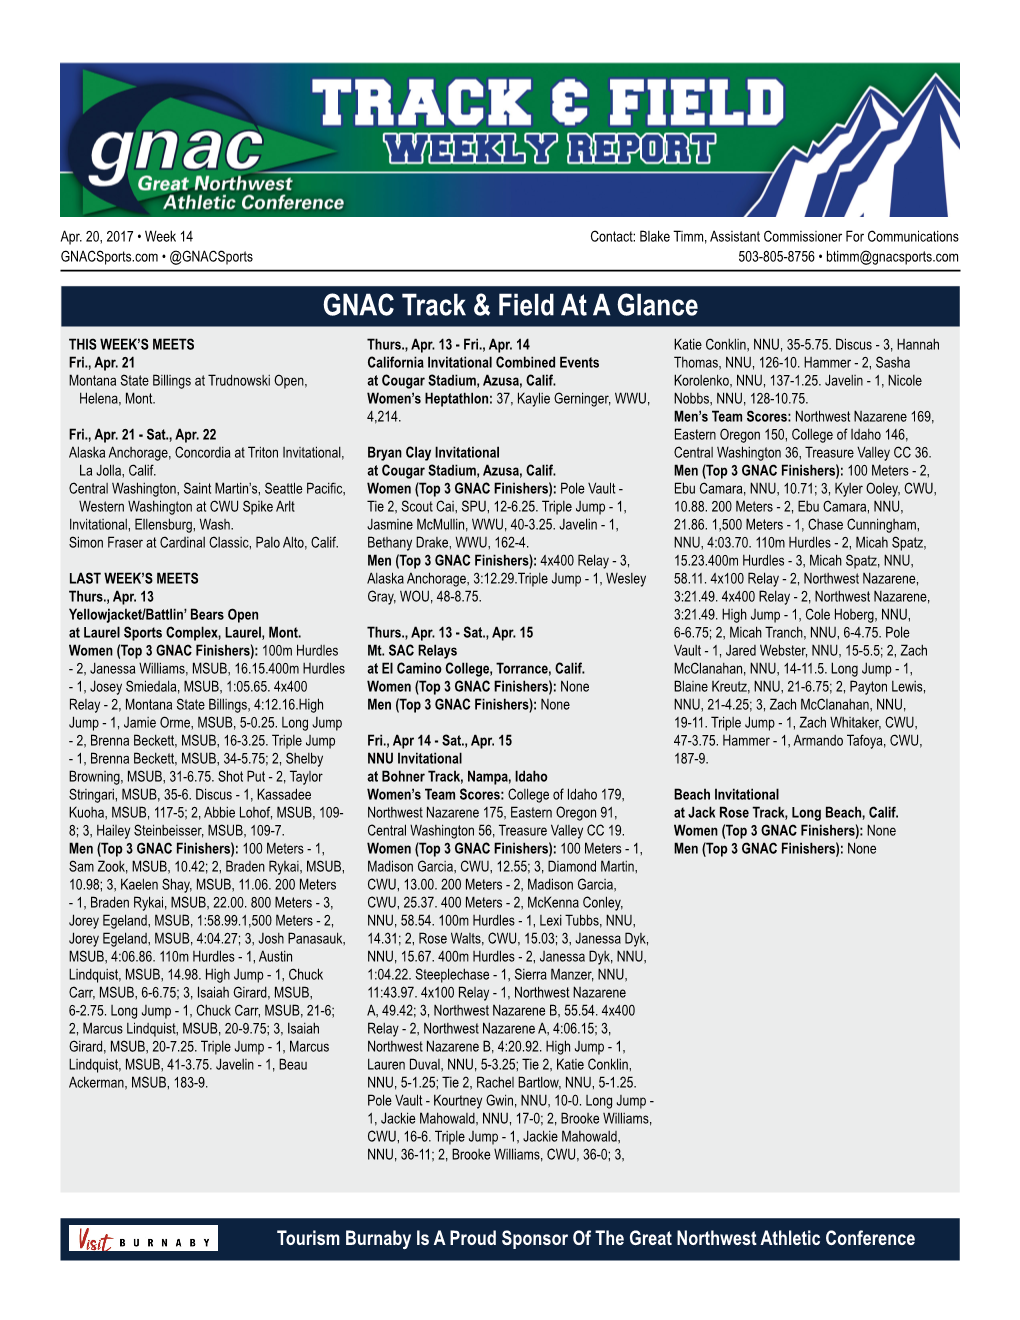 GNAC Track & Field at a Glance